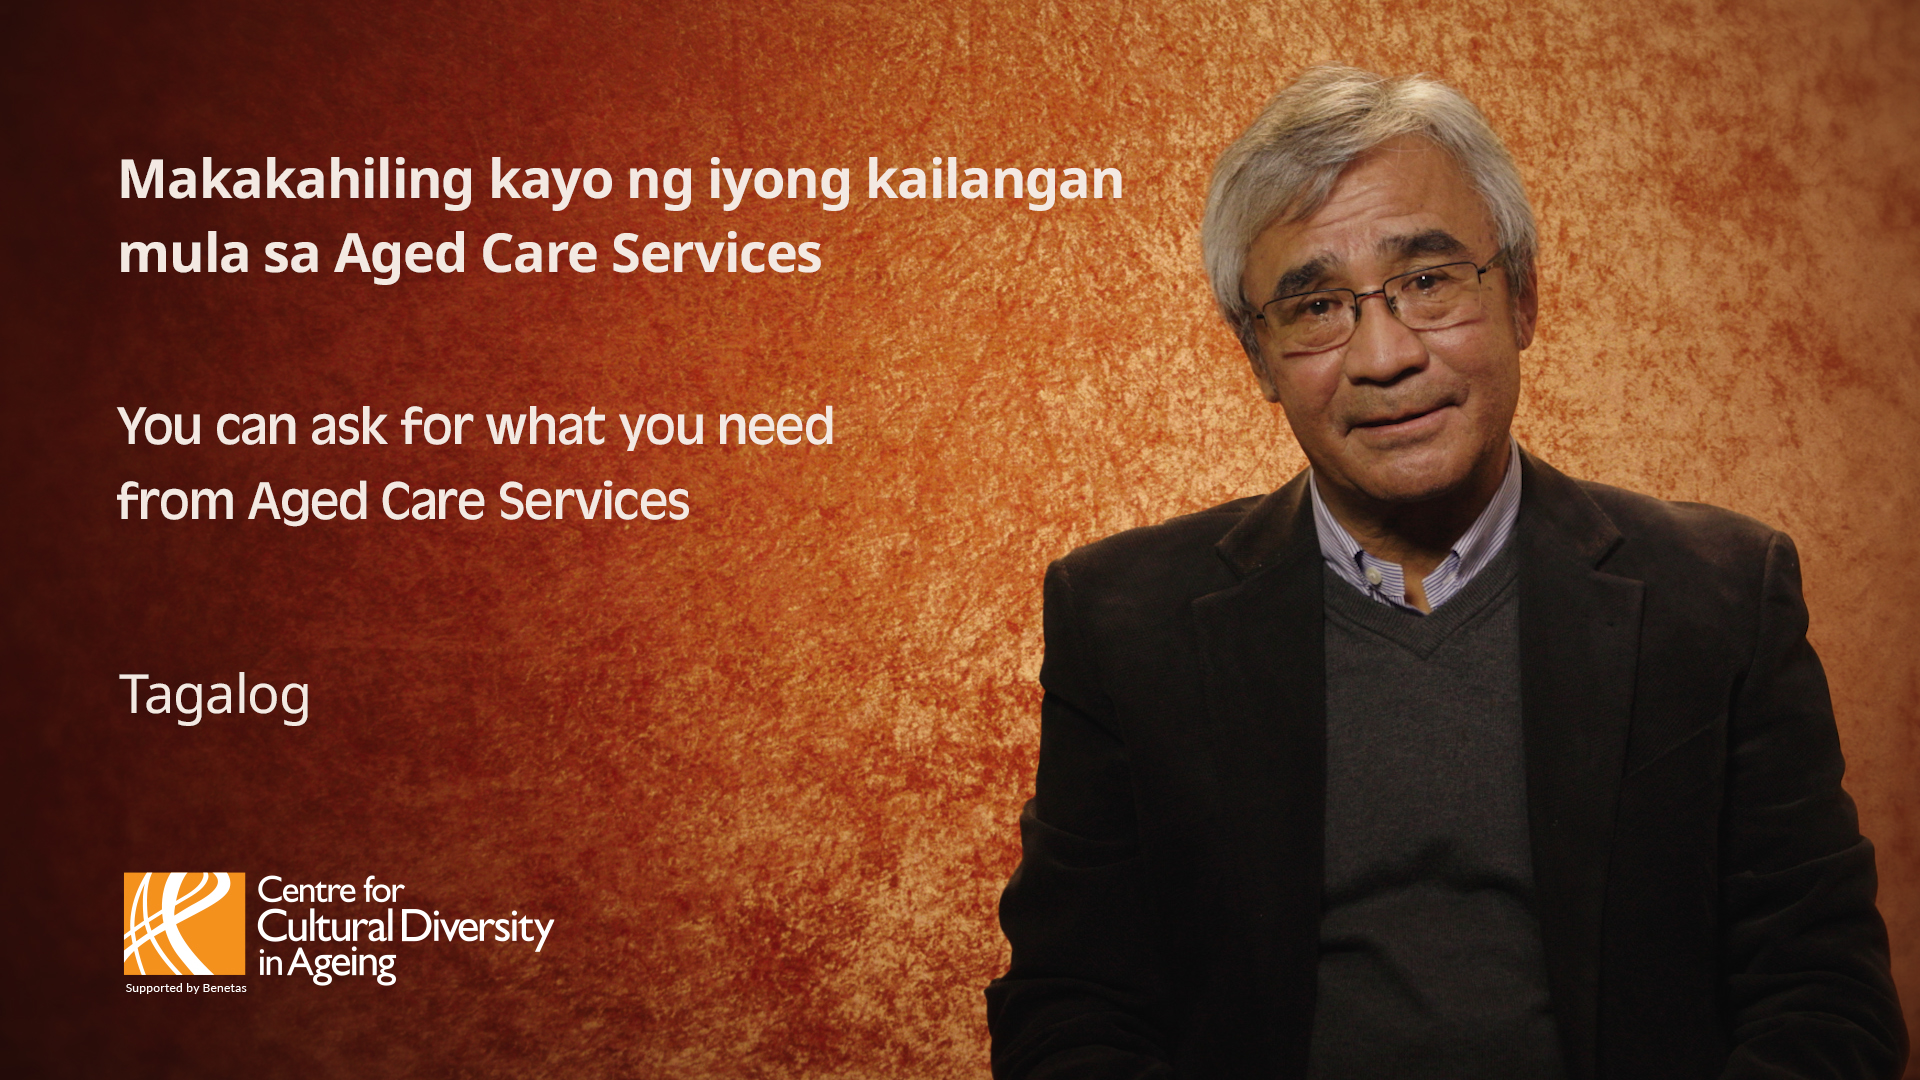 You can ask for what you need from aged care services tagalog thumbnail